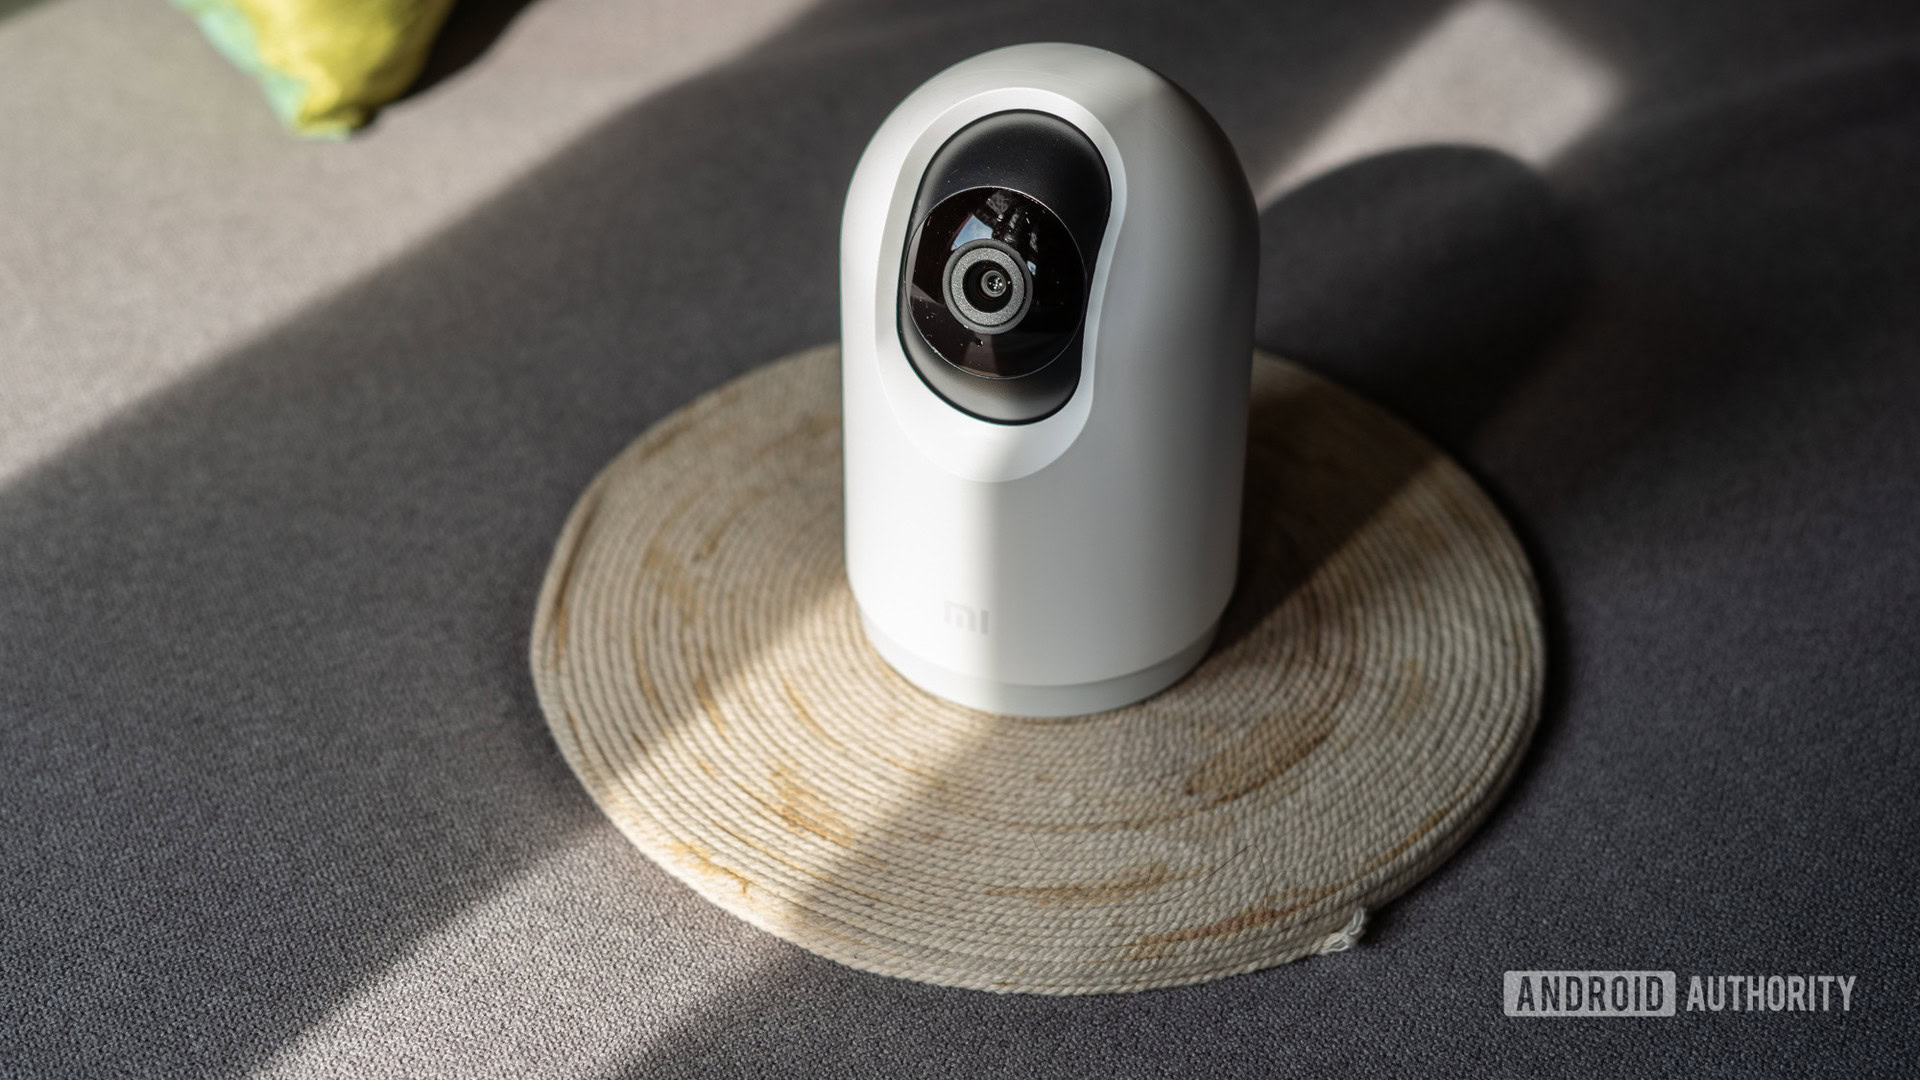 Xiaomi Mi 360 Home Security Camera 2K Pro review: Security and value